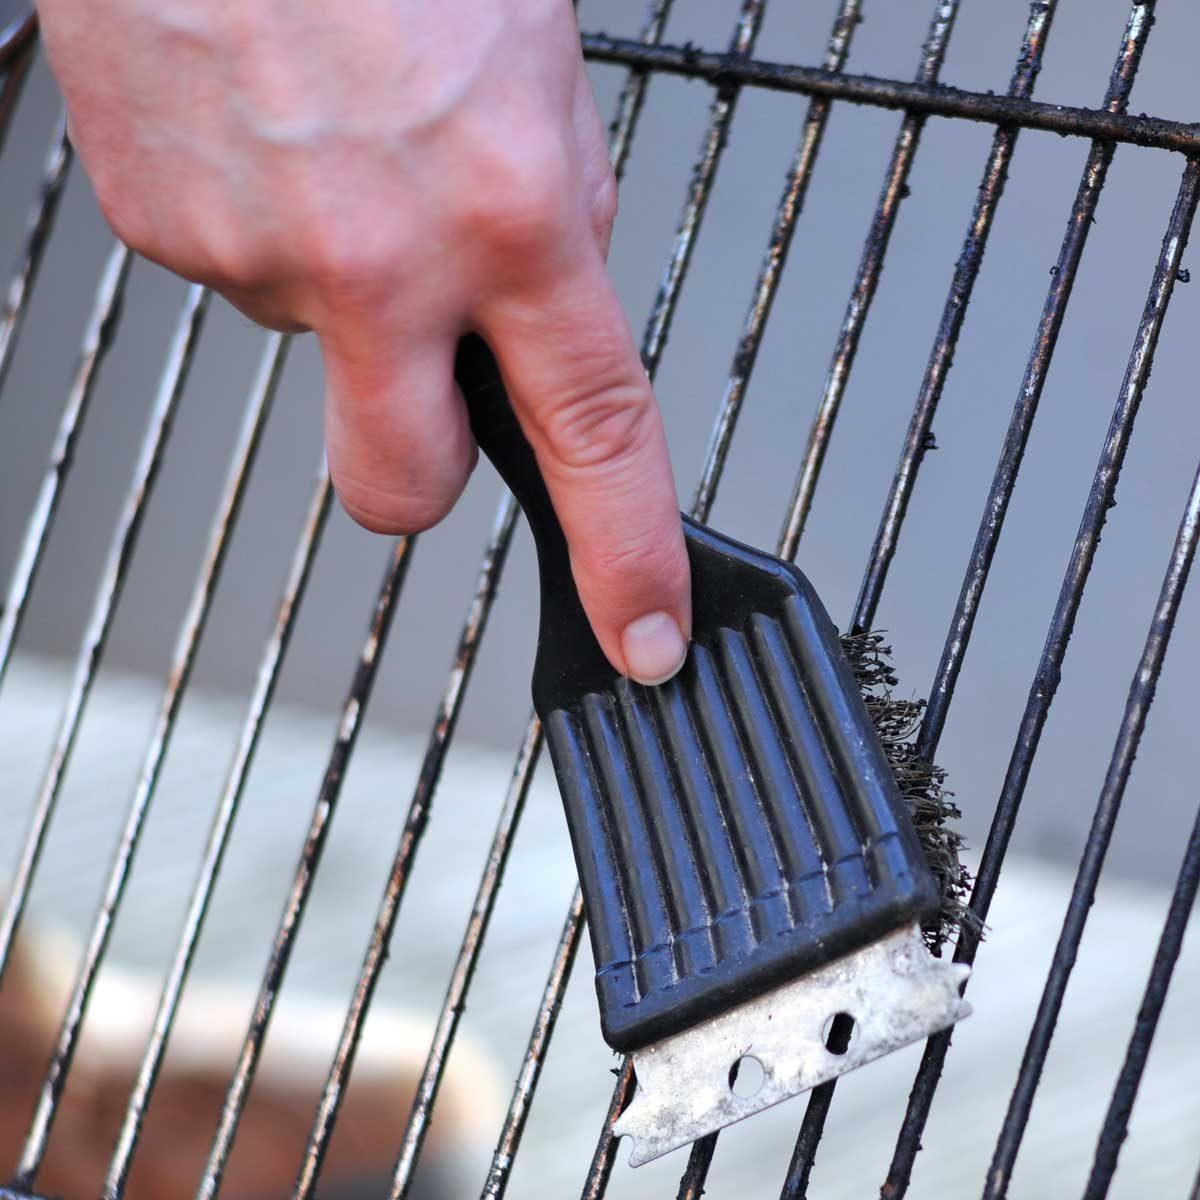 https://www.familyhandyman.com/wp-content/uploads/2020/02/cleaning-grill-grates-GettyImages-157609806.jpg